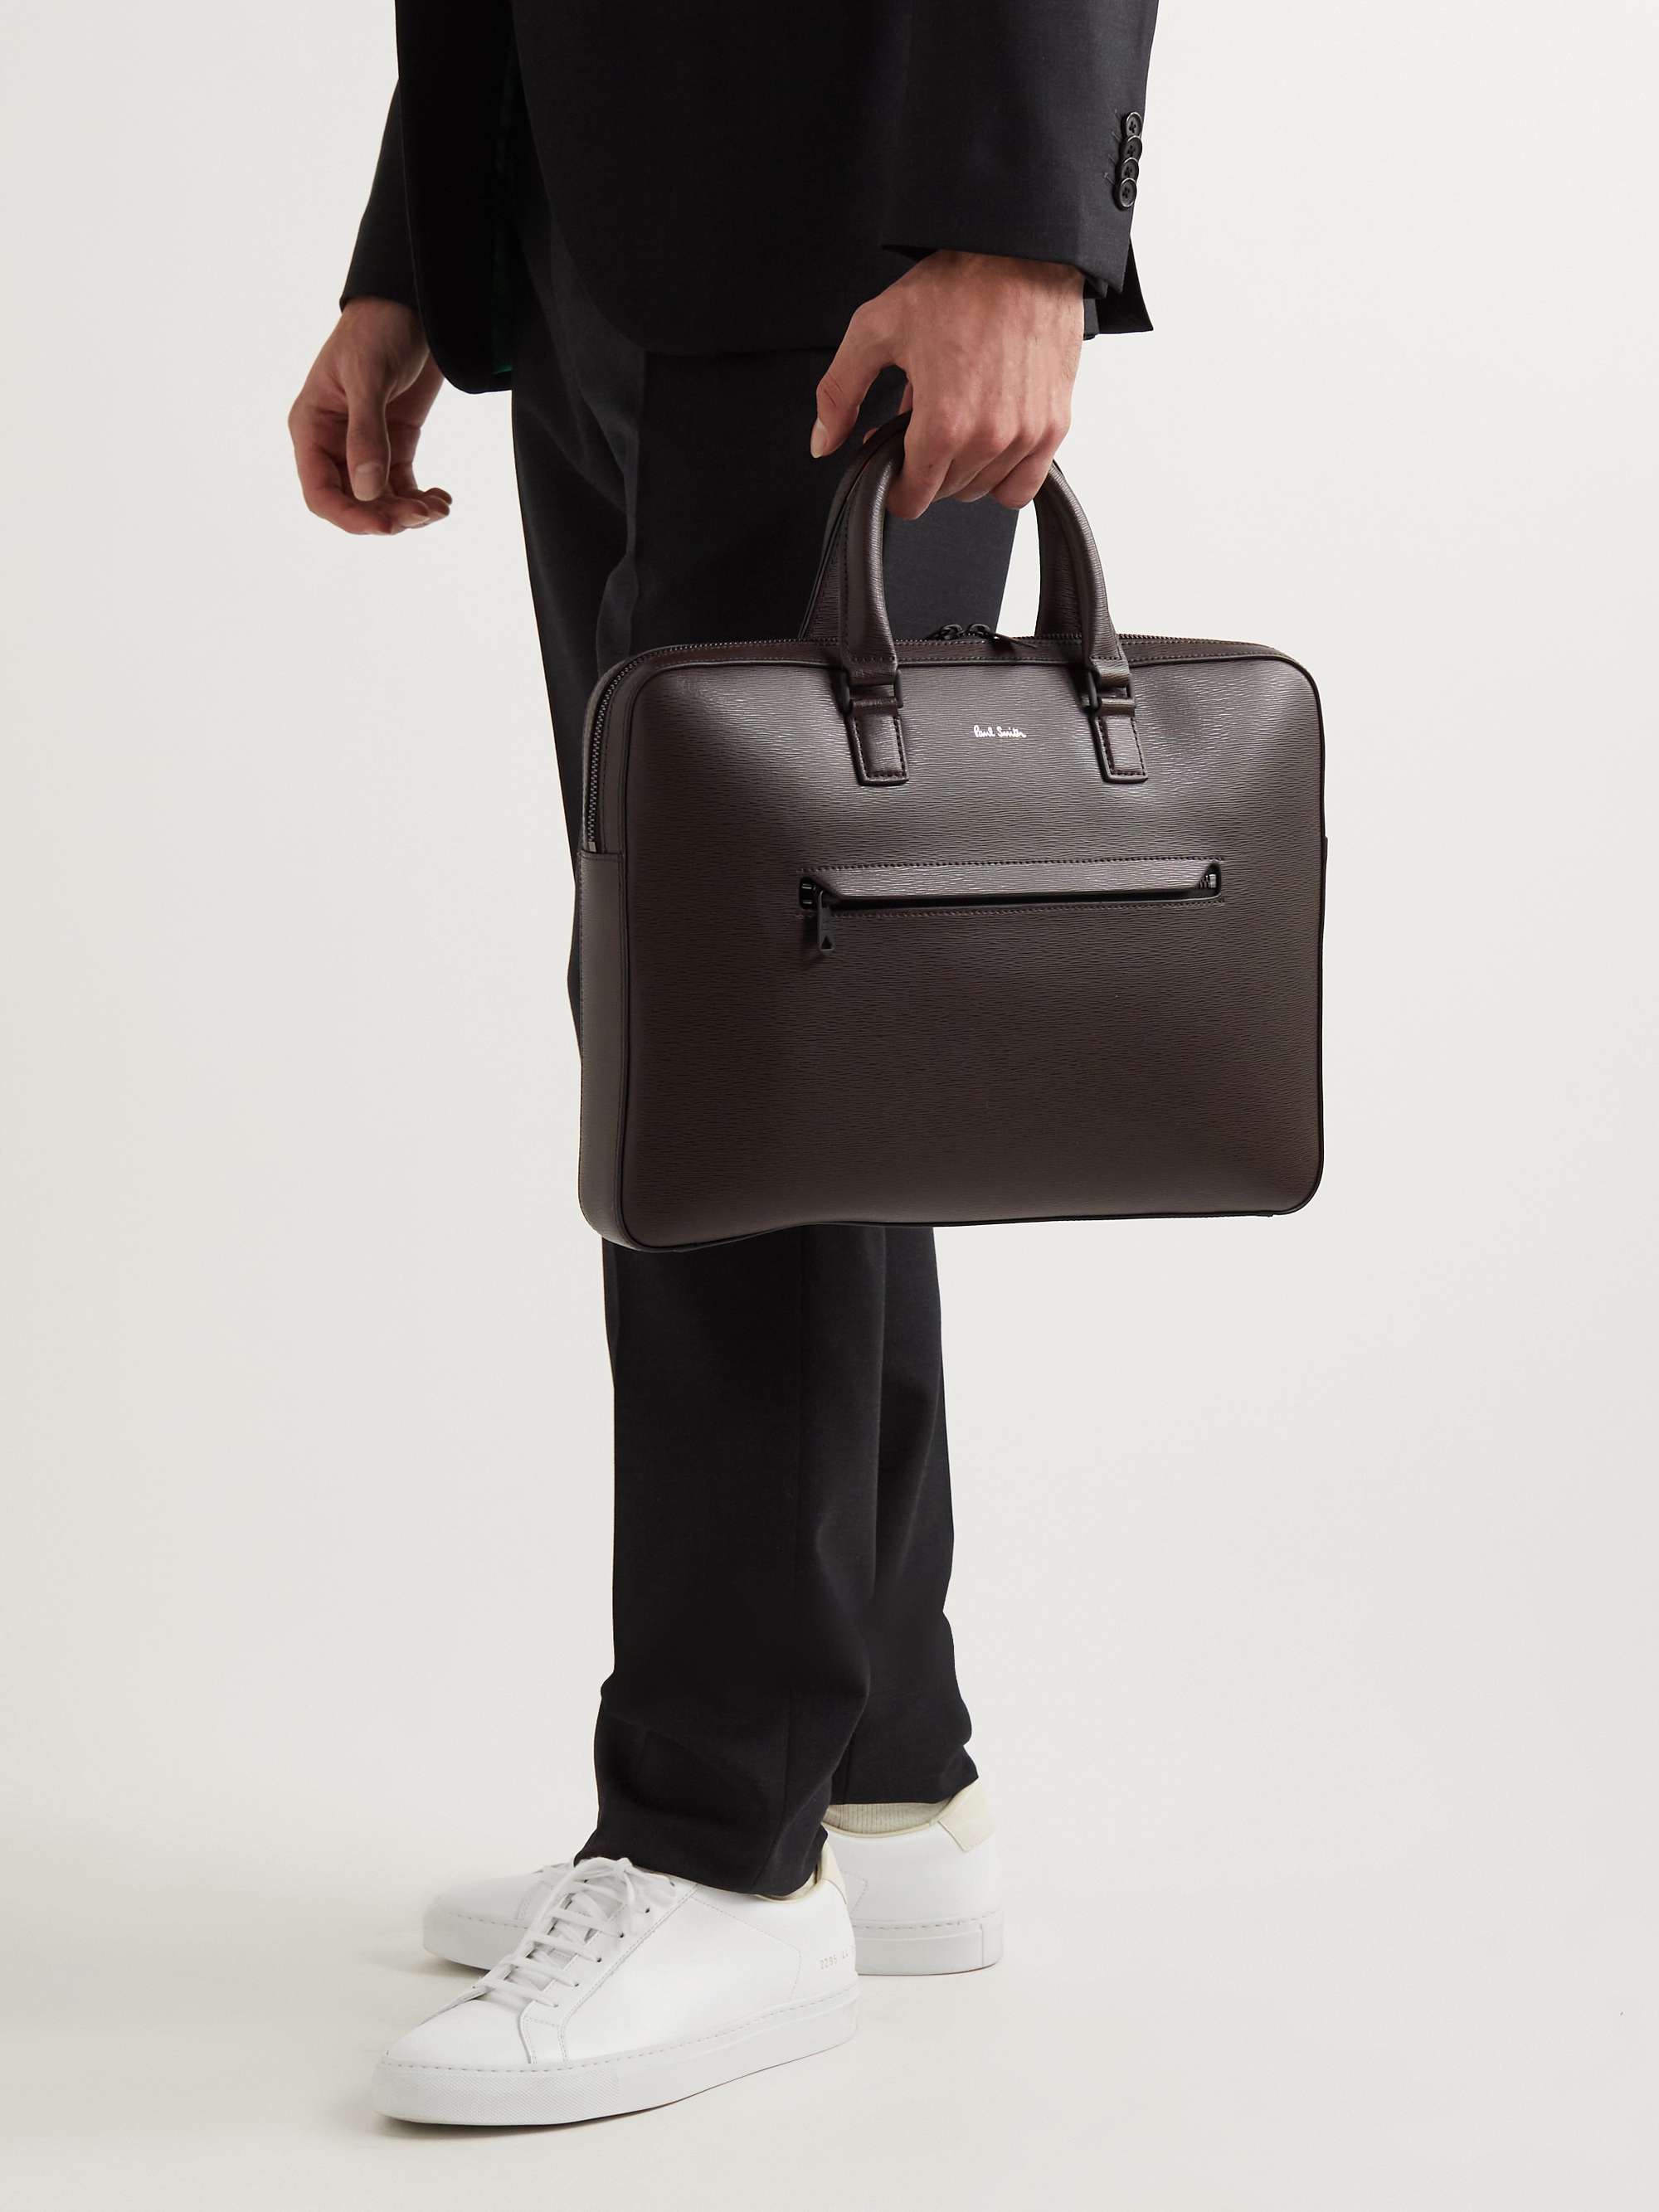 PAUL SMITH Embossed Leather Briefcase